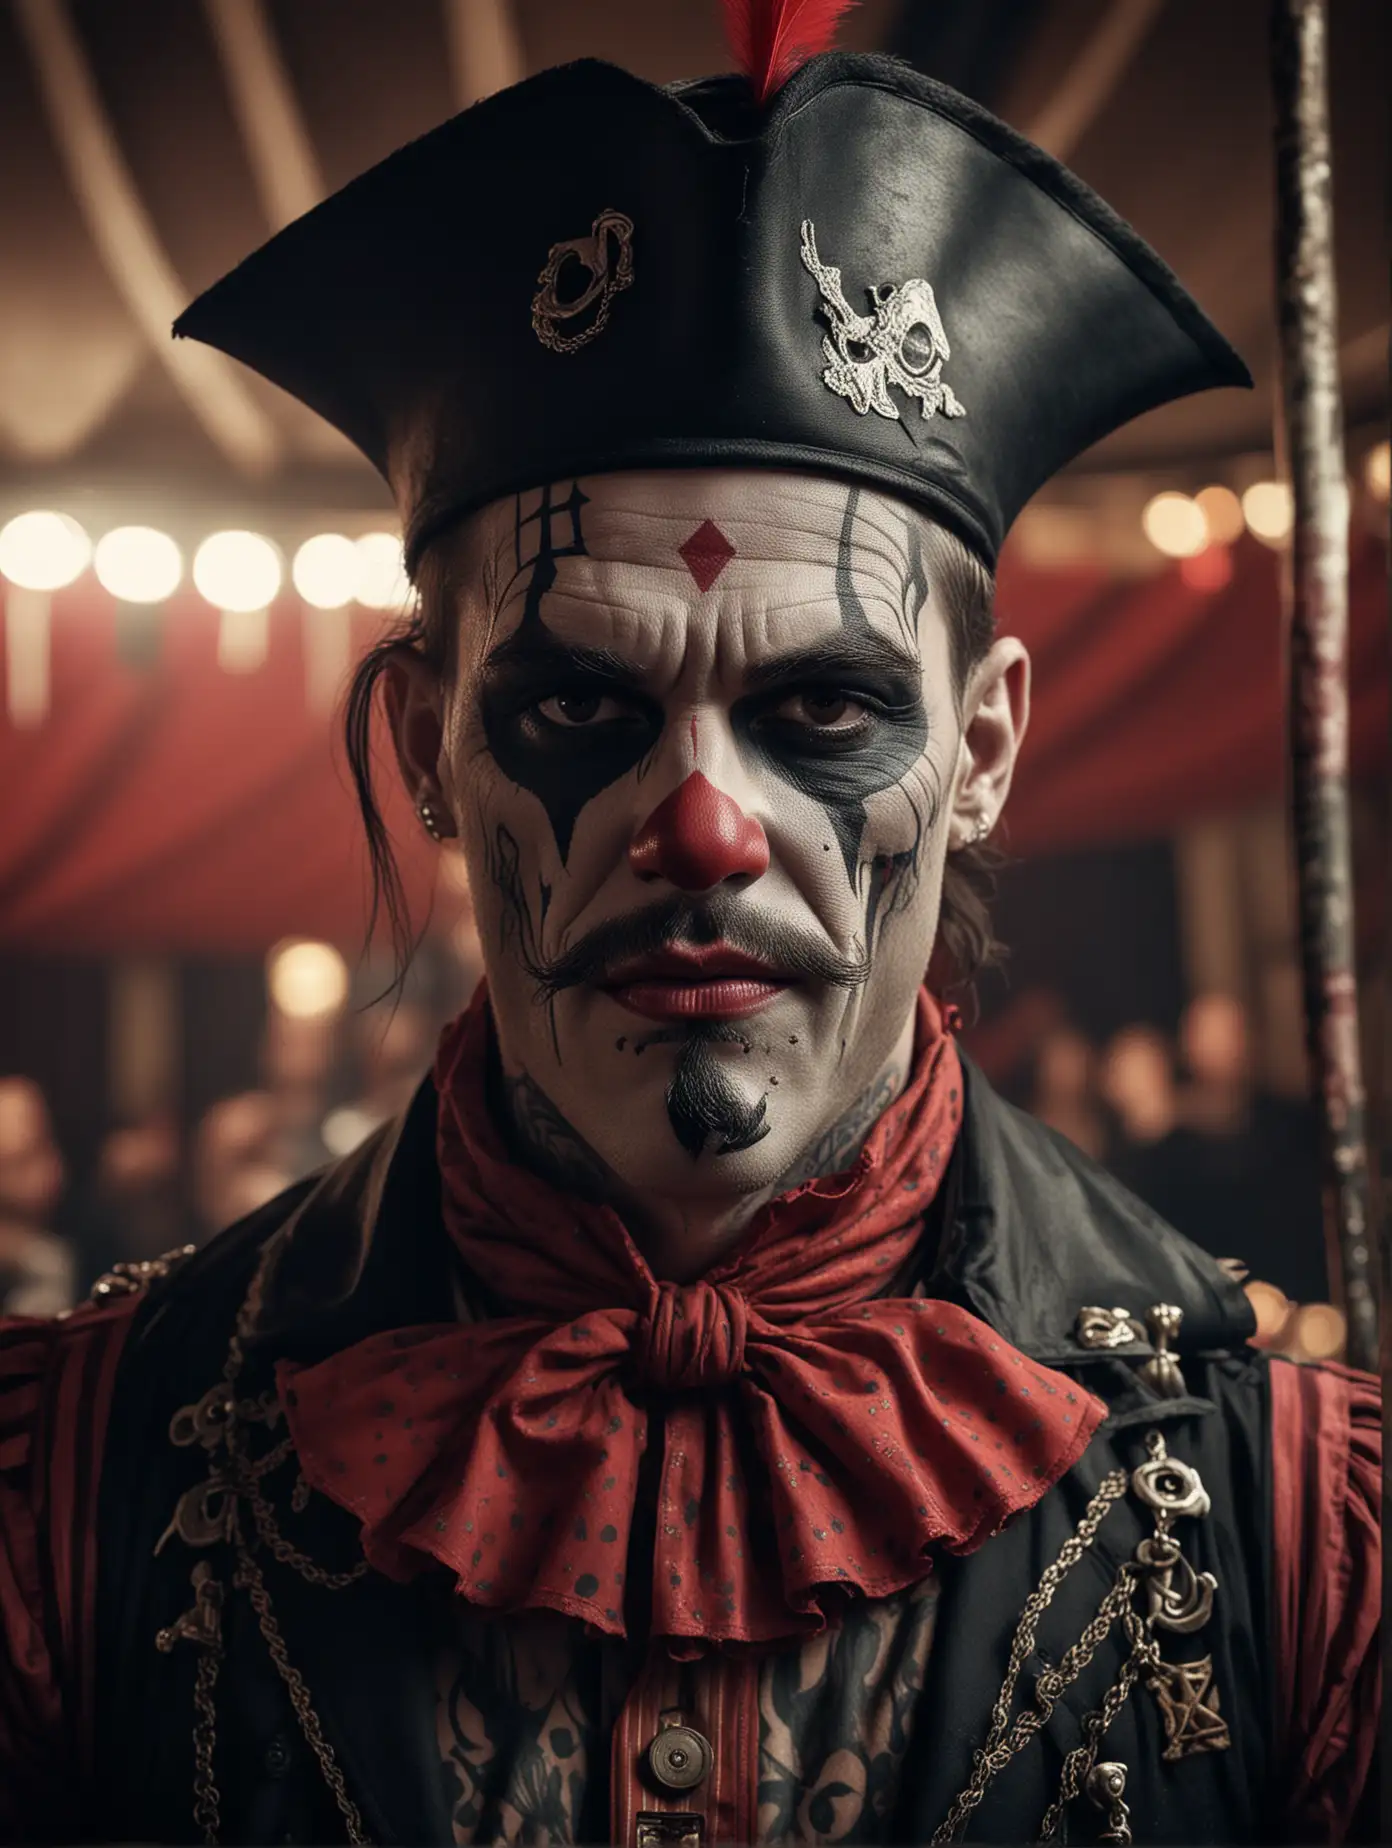 close up upper body portrait, highly detailed, sinister, macabre, circus clown, in the style of a 1960's horror movie, eerie symbolism, sinister dark atmosphere, black and red palette, close up portraiture, well built male, wearing a pirate themed outfit, pirate hat, covered in tattoos, red moustache, inside a circus tent, nature-inspired pieces, circus costumes, ultra details